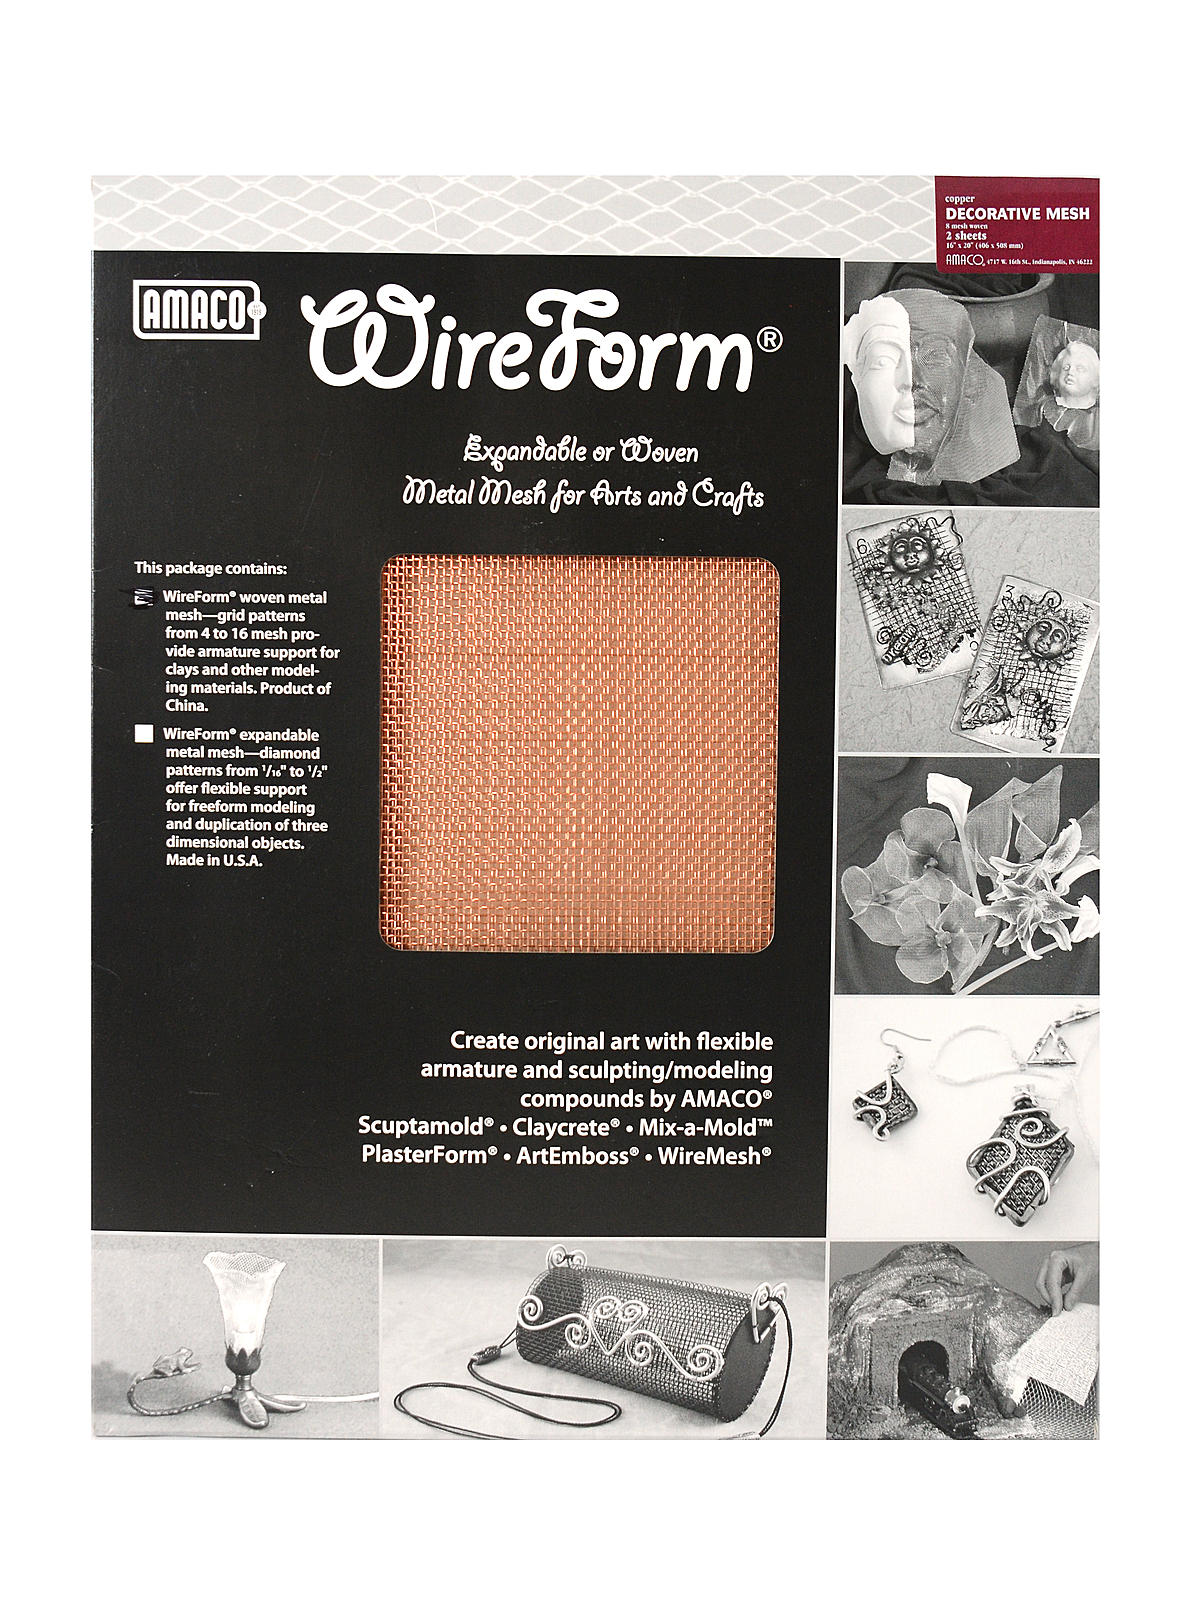 Wireform Metal Mesh Copper Woven Decorative Mesh - 8 Mesh Pack Of 2 Sheets